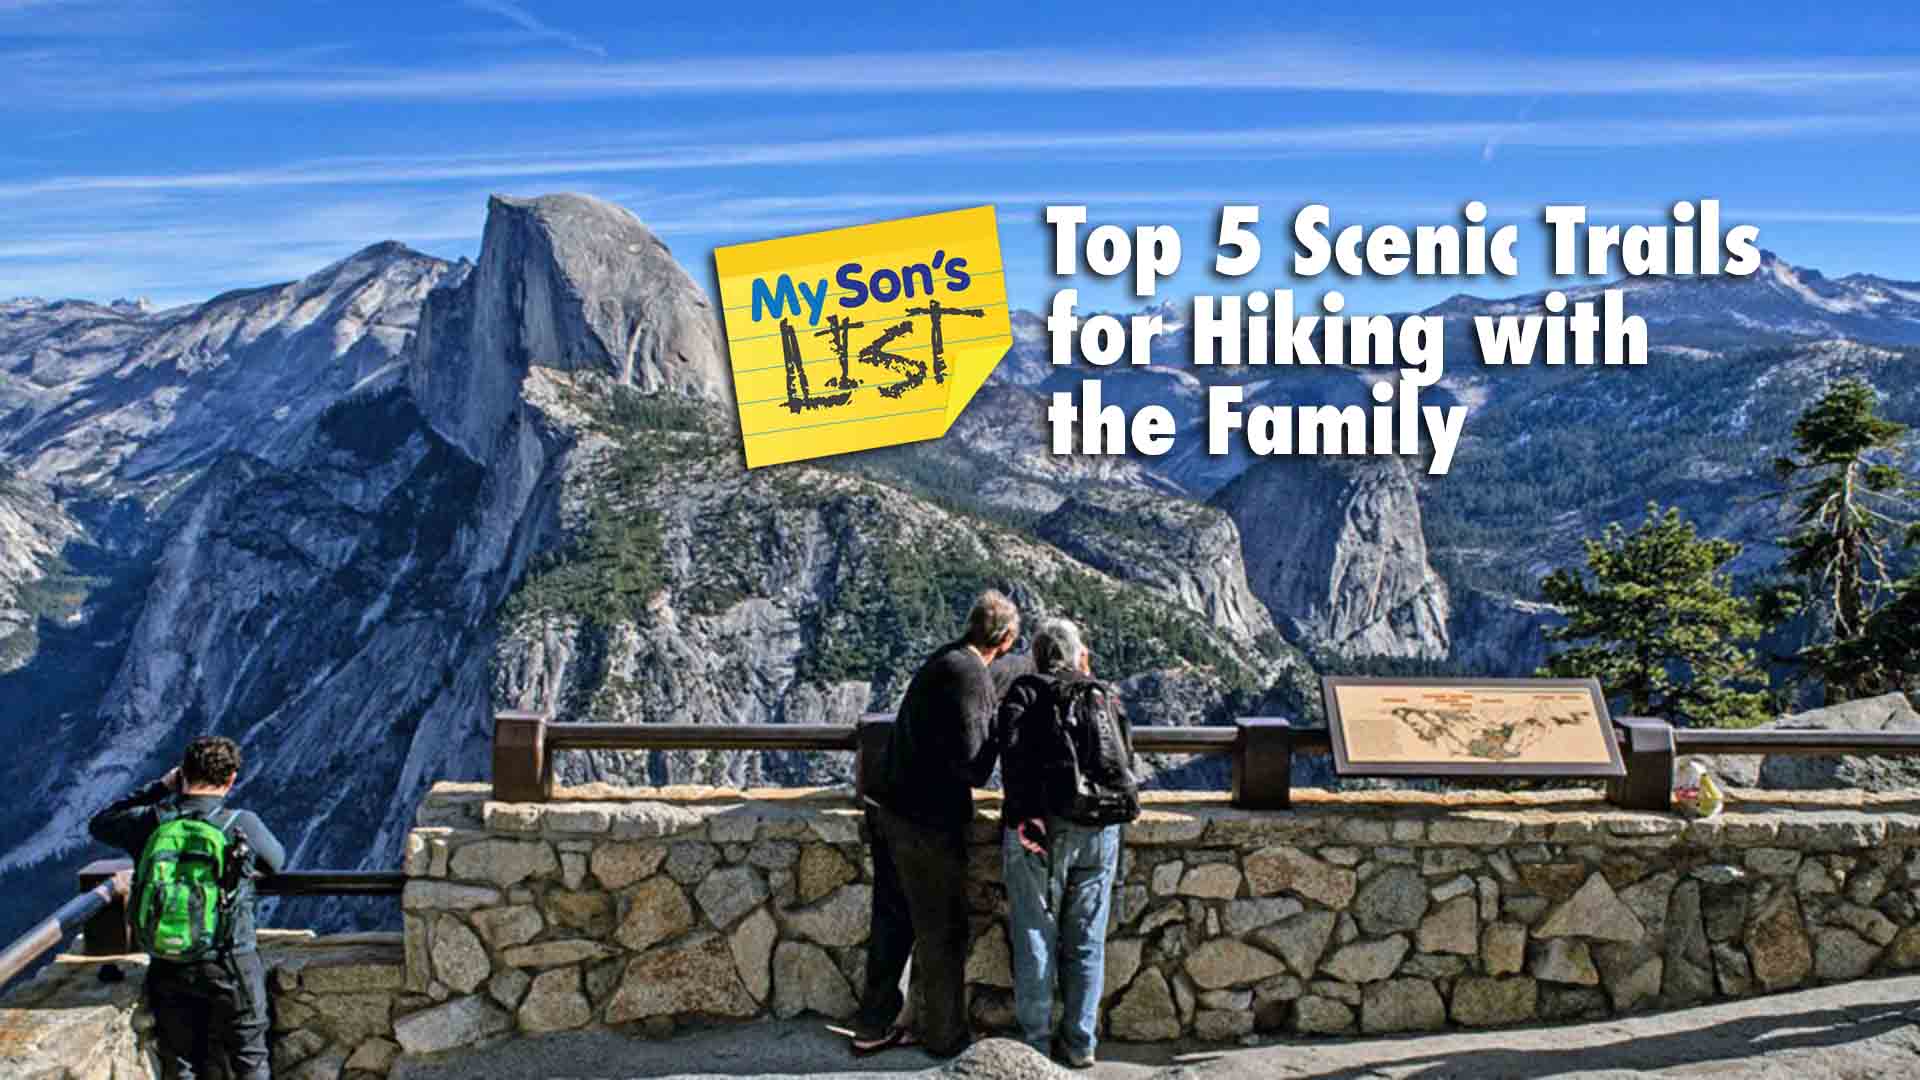  Top 5 Scenic Trails for Hiking with the Family